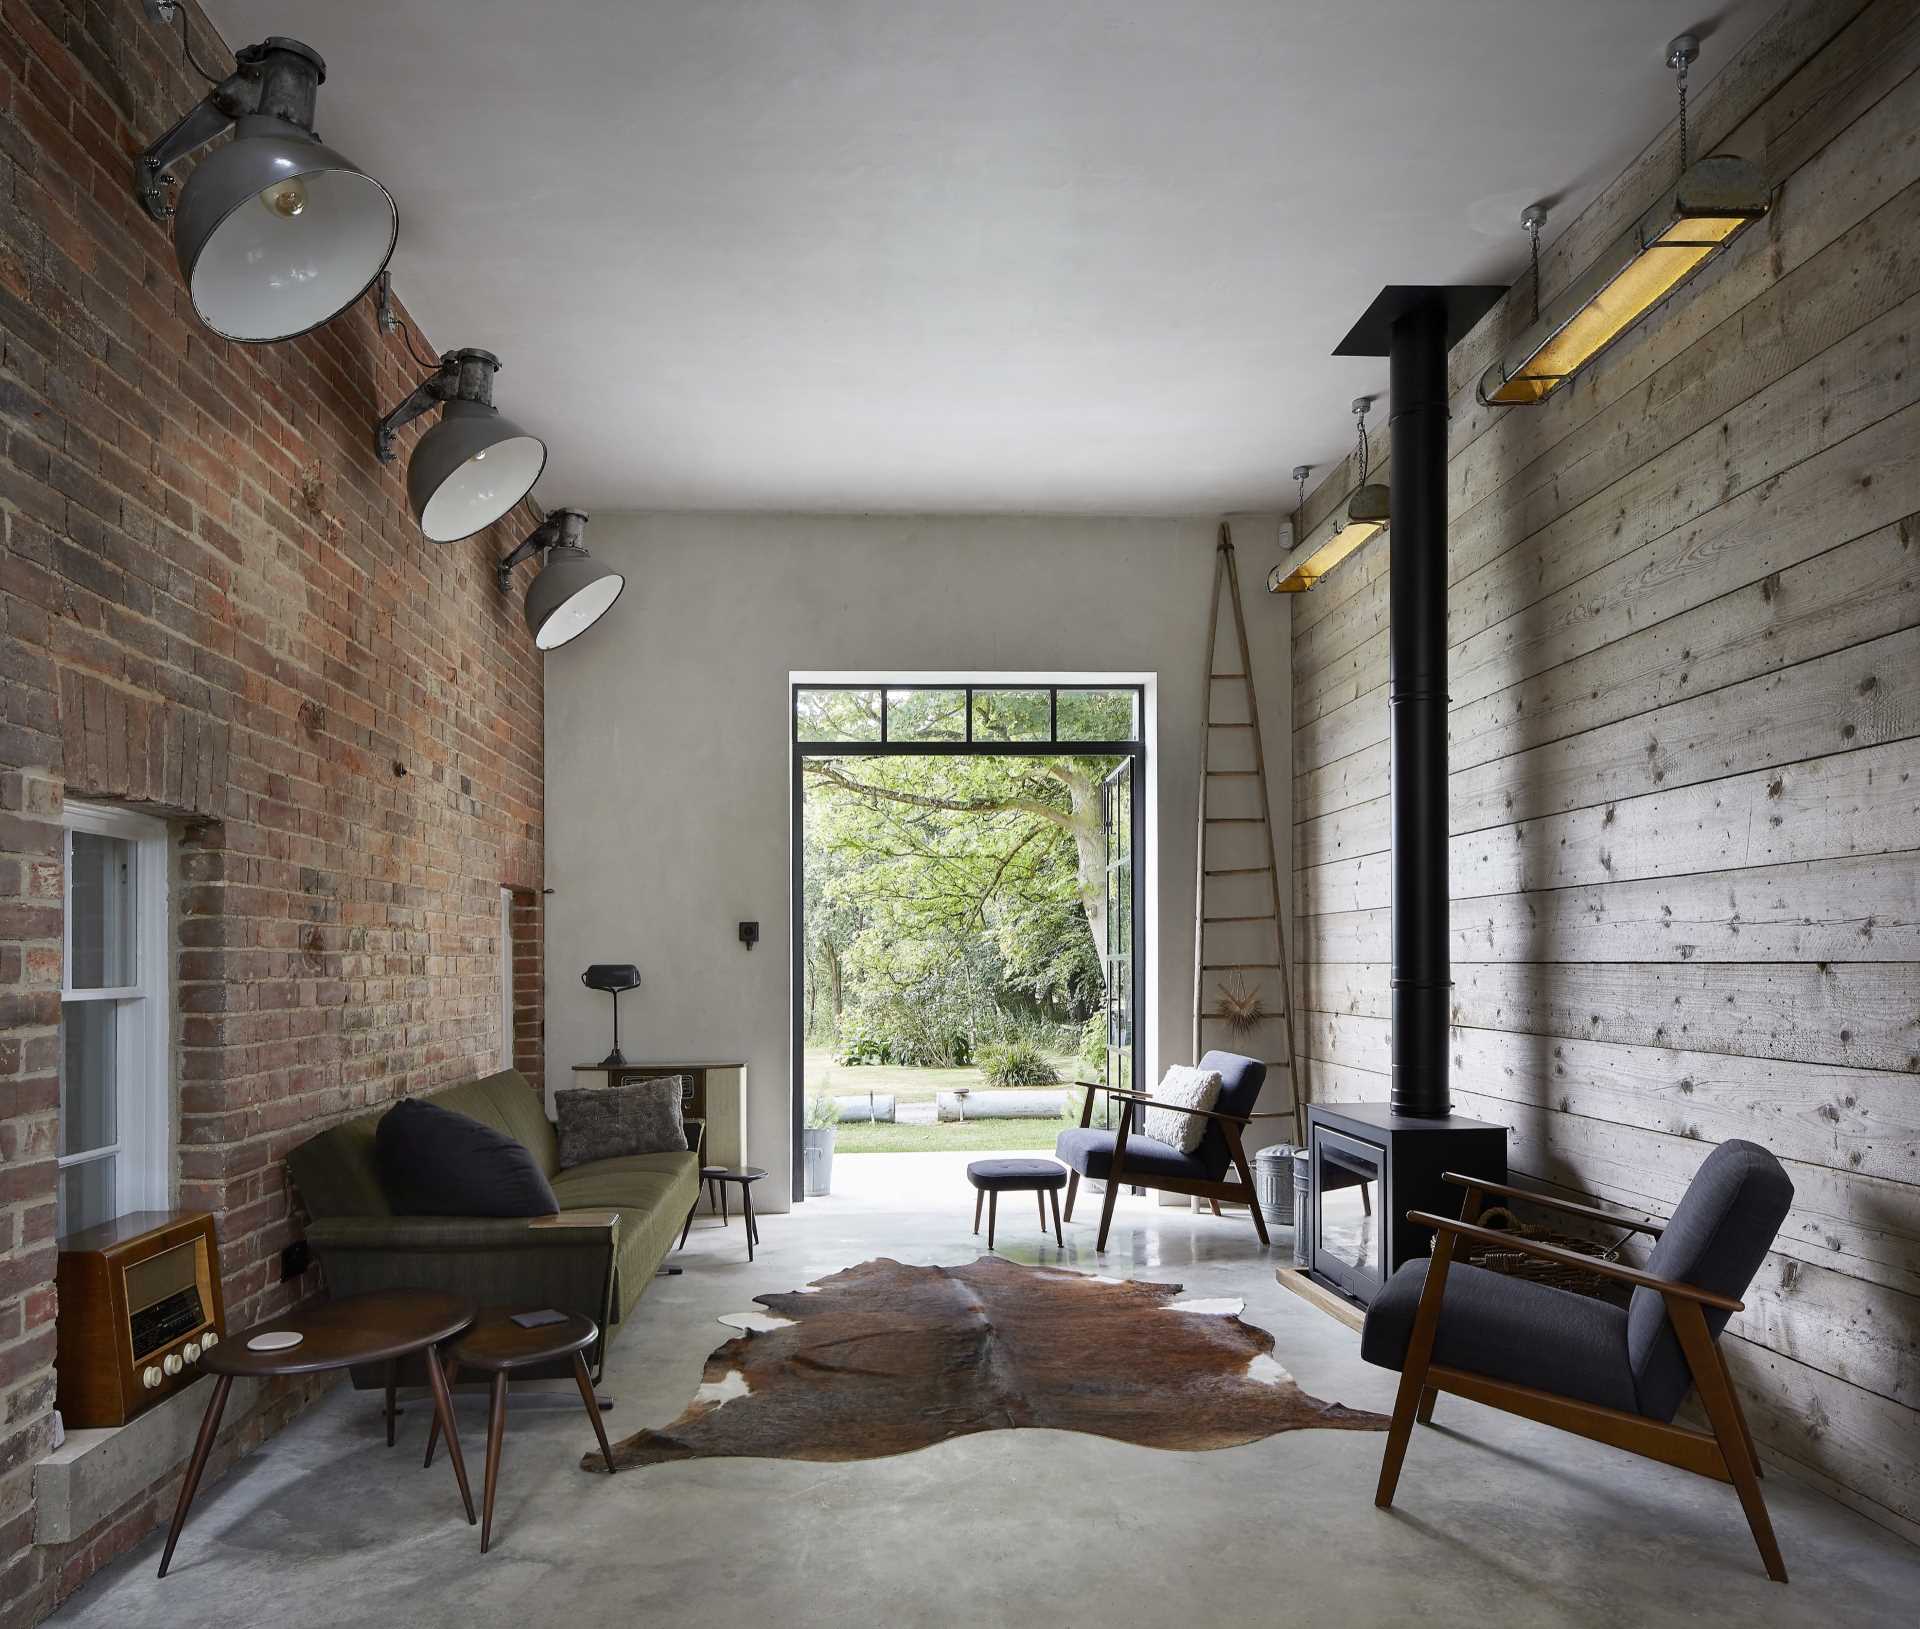 A home addition with a living room that includes the original brick wall and windows as an accent wall.